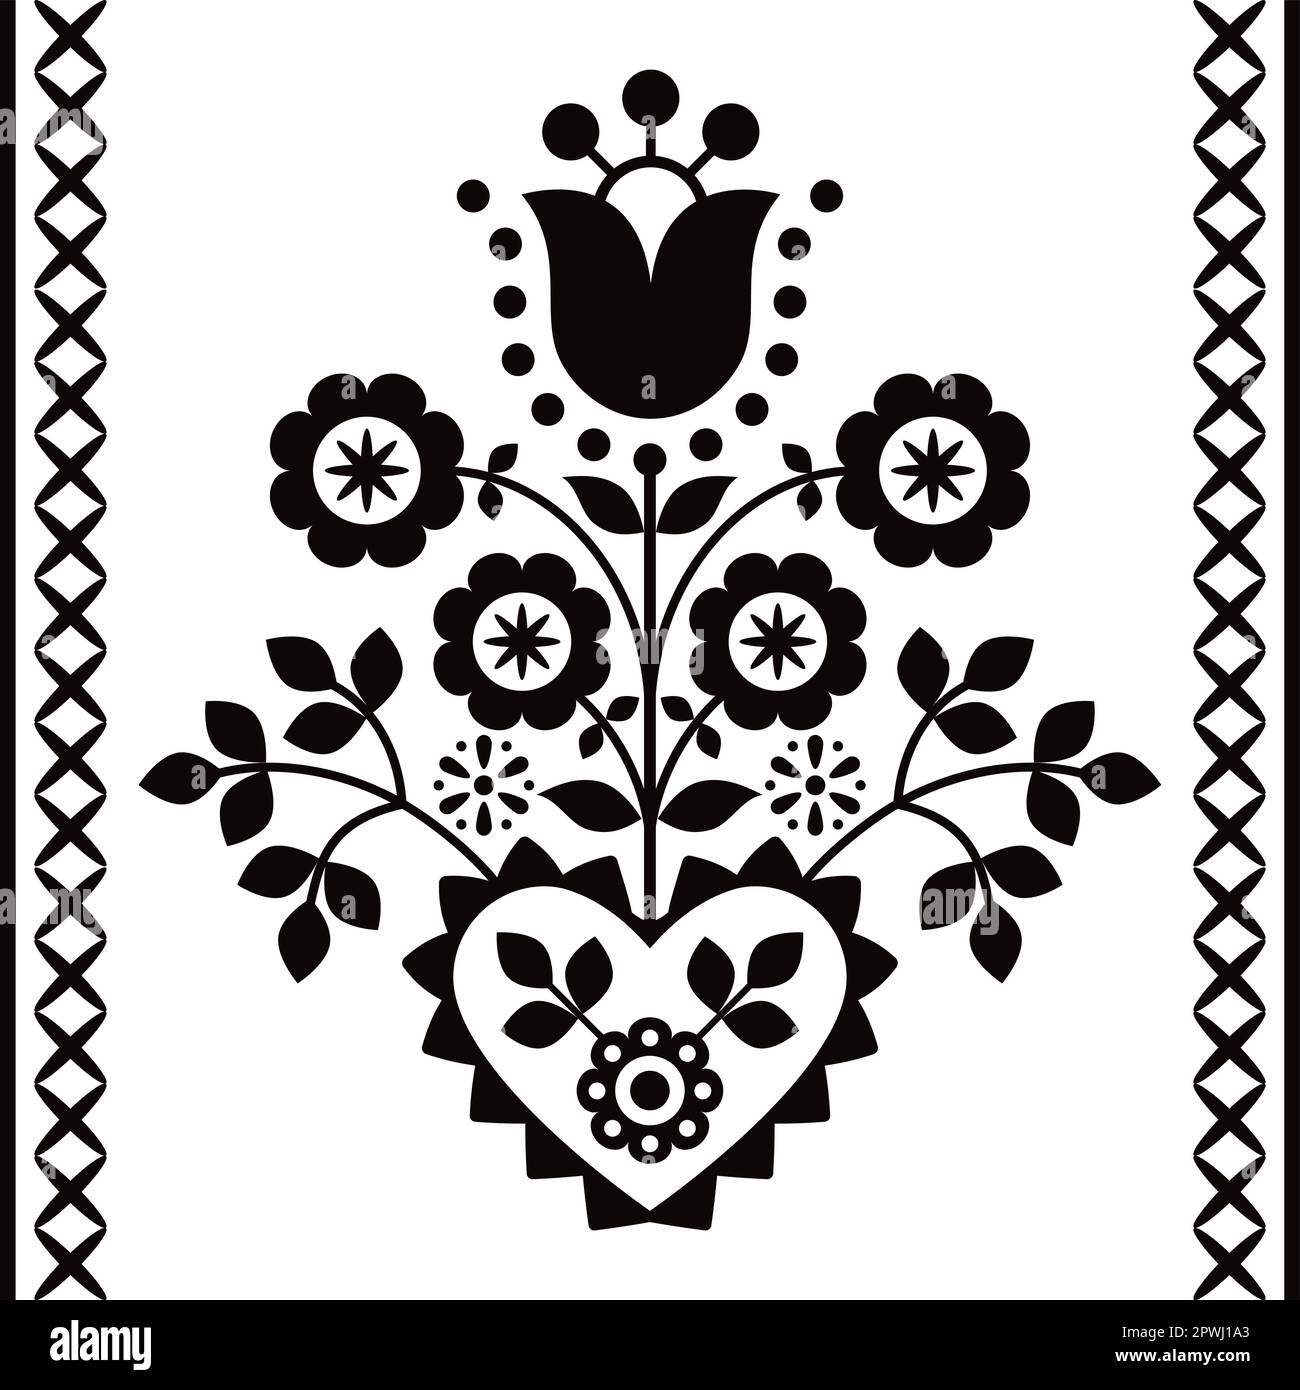 Polish Floral folk art vector black and white design from Nowy Sacz in Poland inspired by traditional highlanders embroidery Lachy Sadeckie Stock Vector